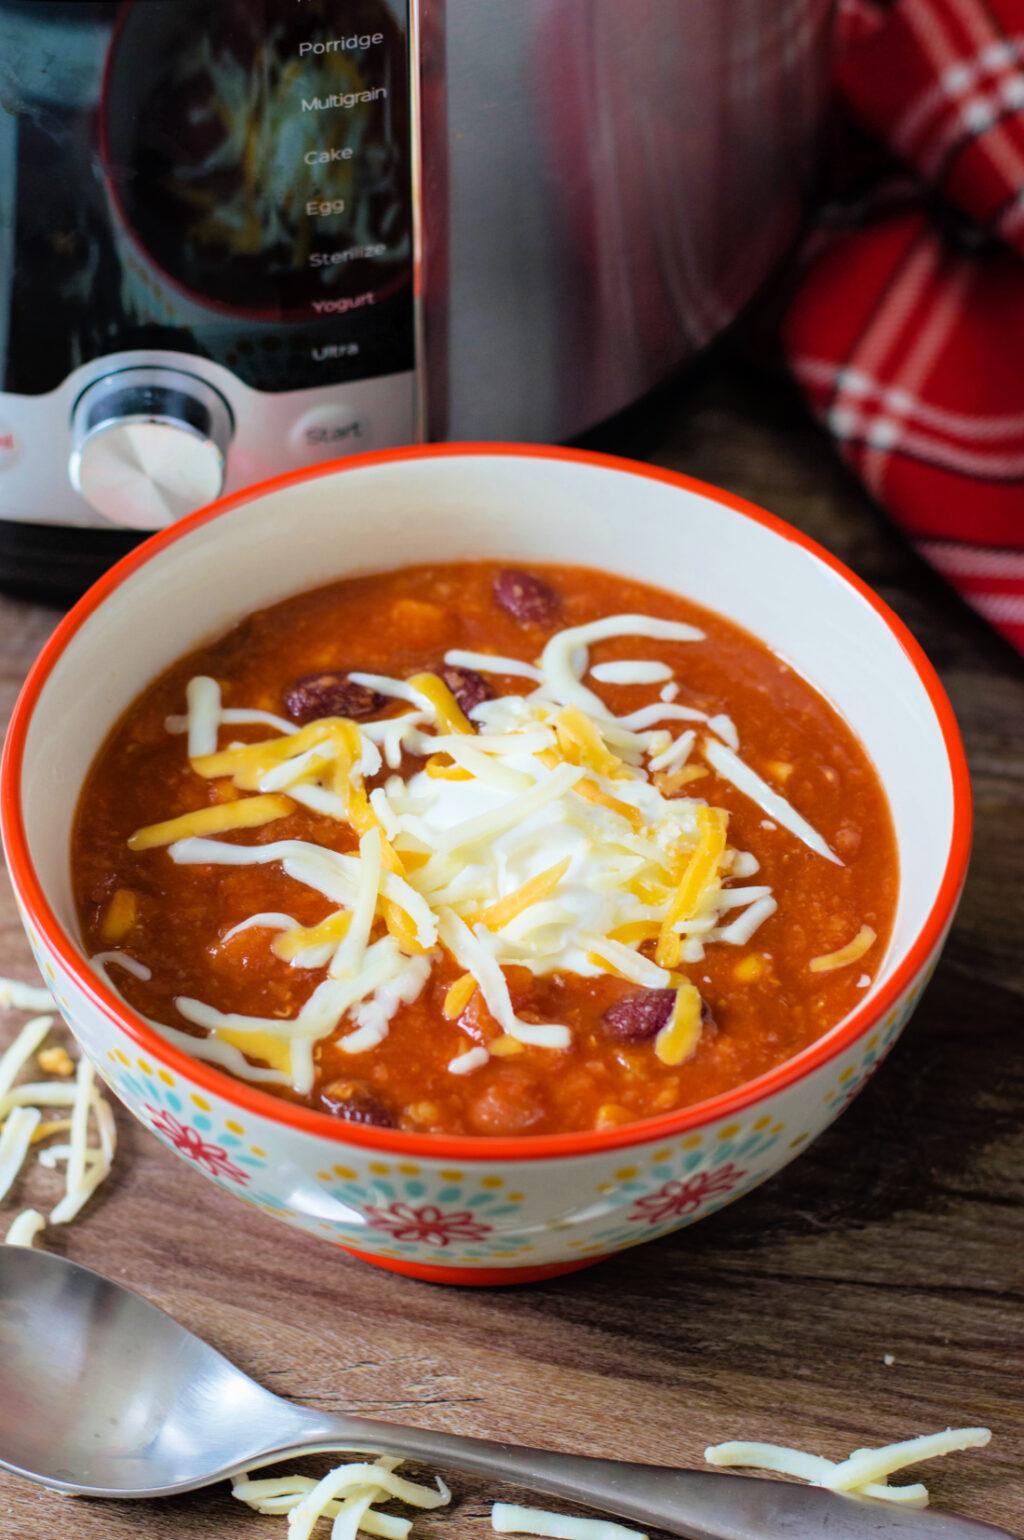 A bowl of vegetarian chili with beans and shredded cheese, placed on a wooden table next to a metal spoon and a red plaid cloth.